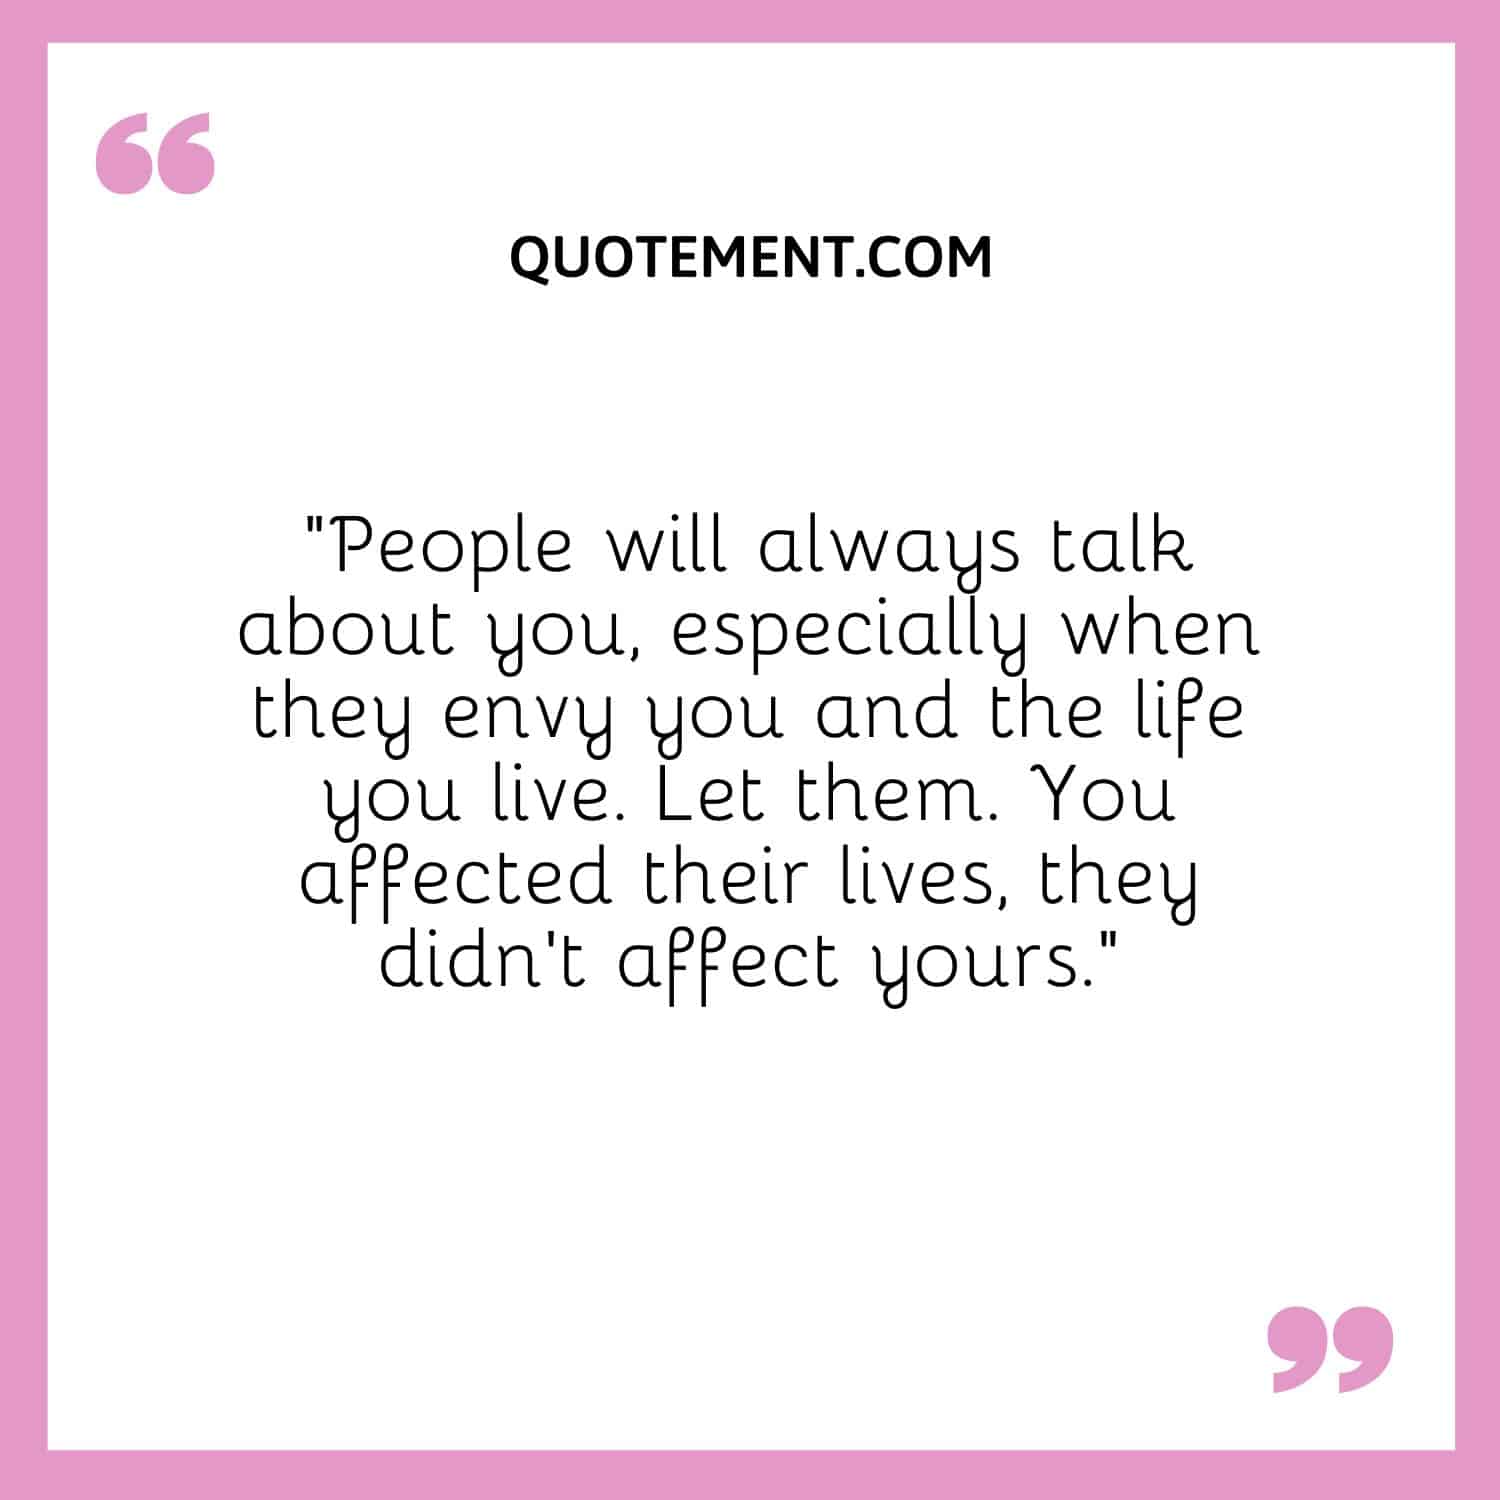 “People will always talk about you, especially when they envy you and the life you live. Let them. You affected their lives, they didn’t affect yours.”